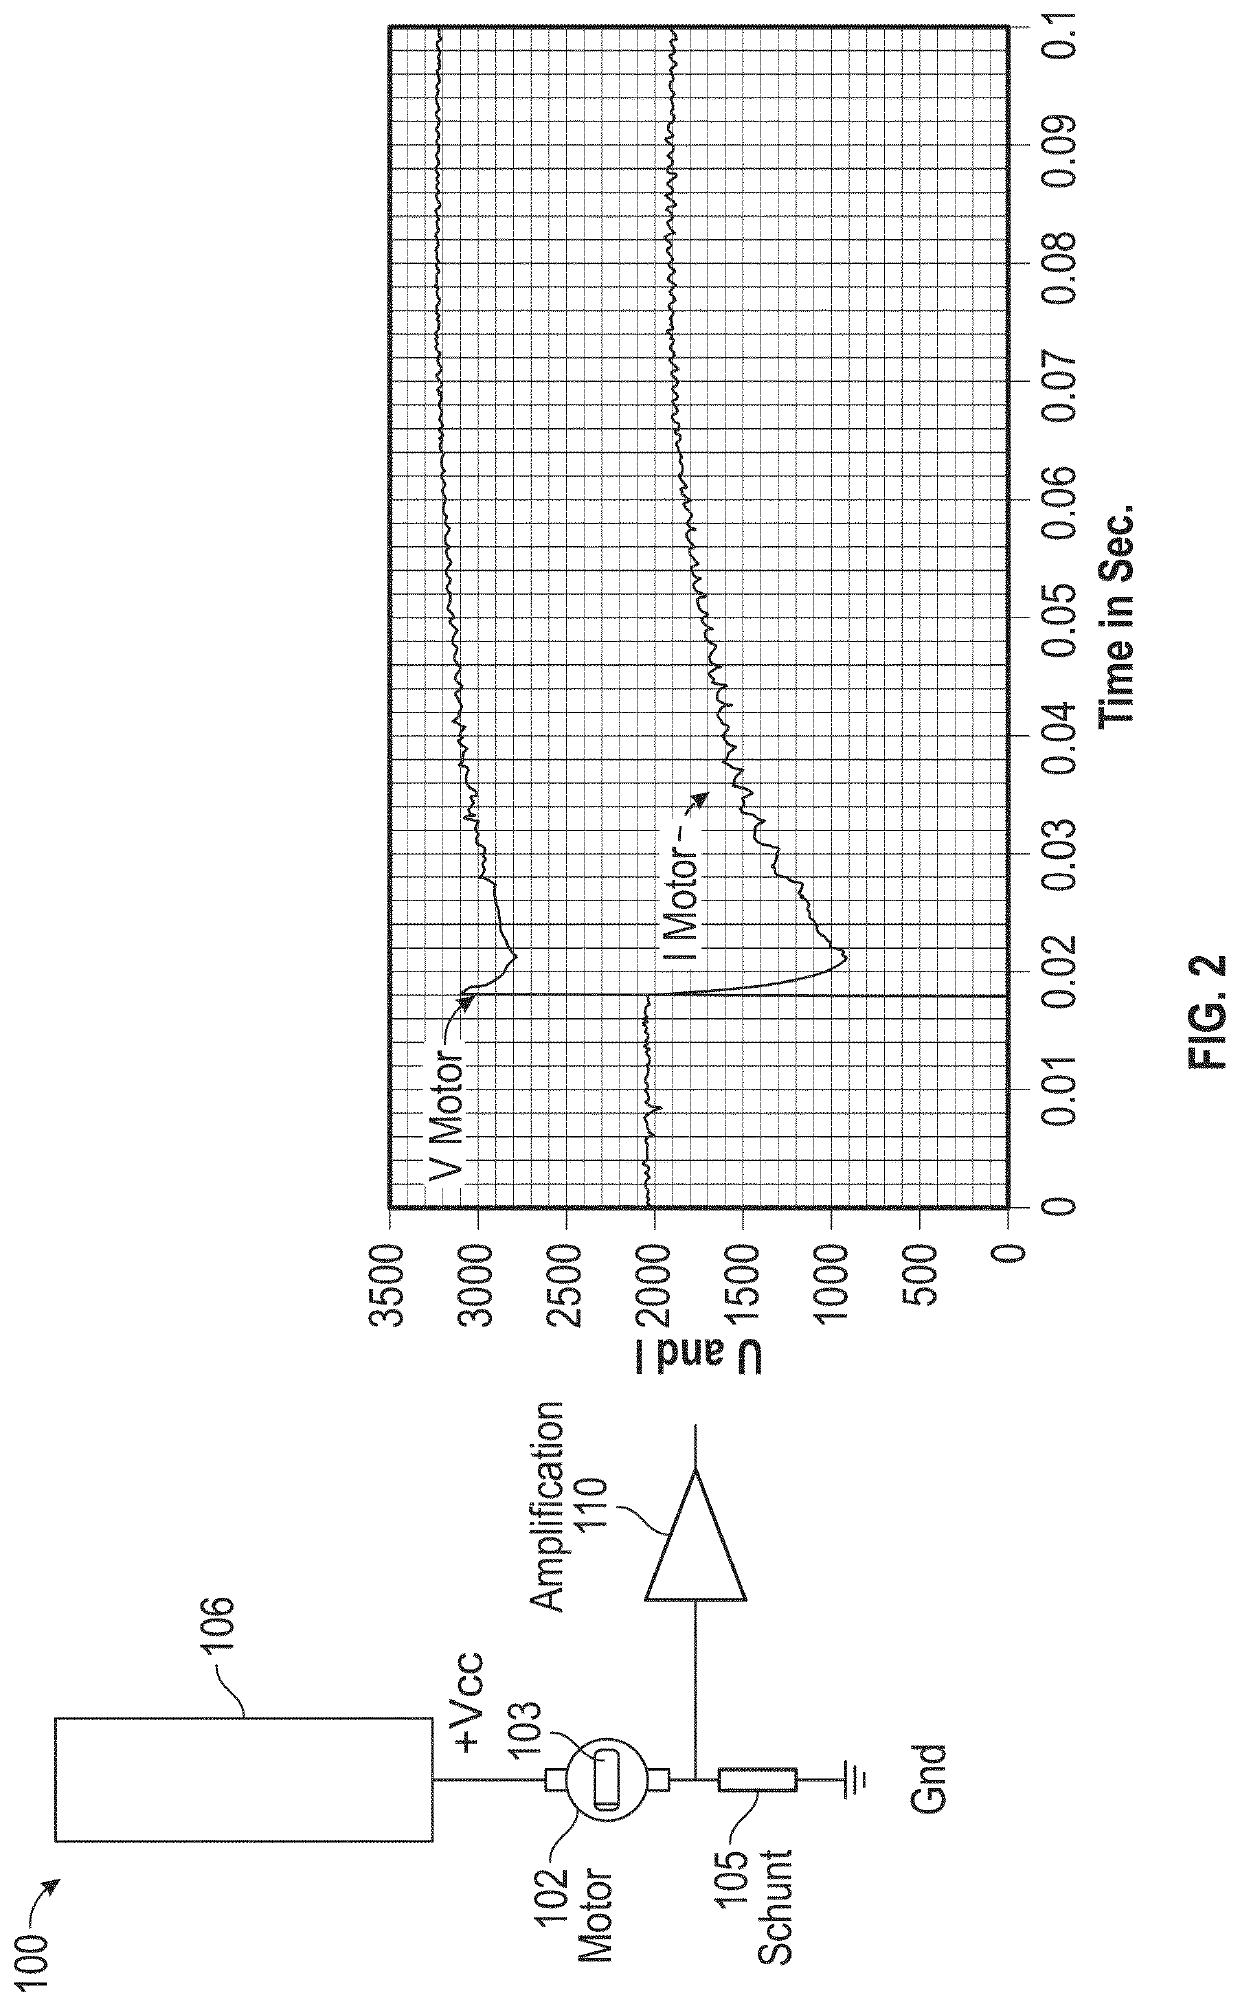 Ripple count circuit including varying ripple threshold detection